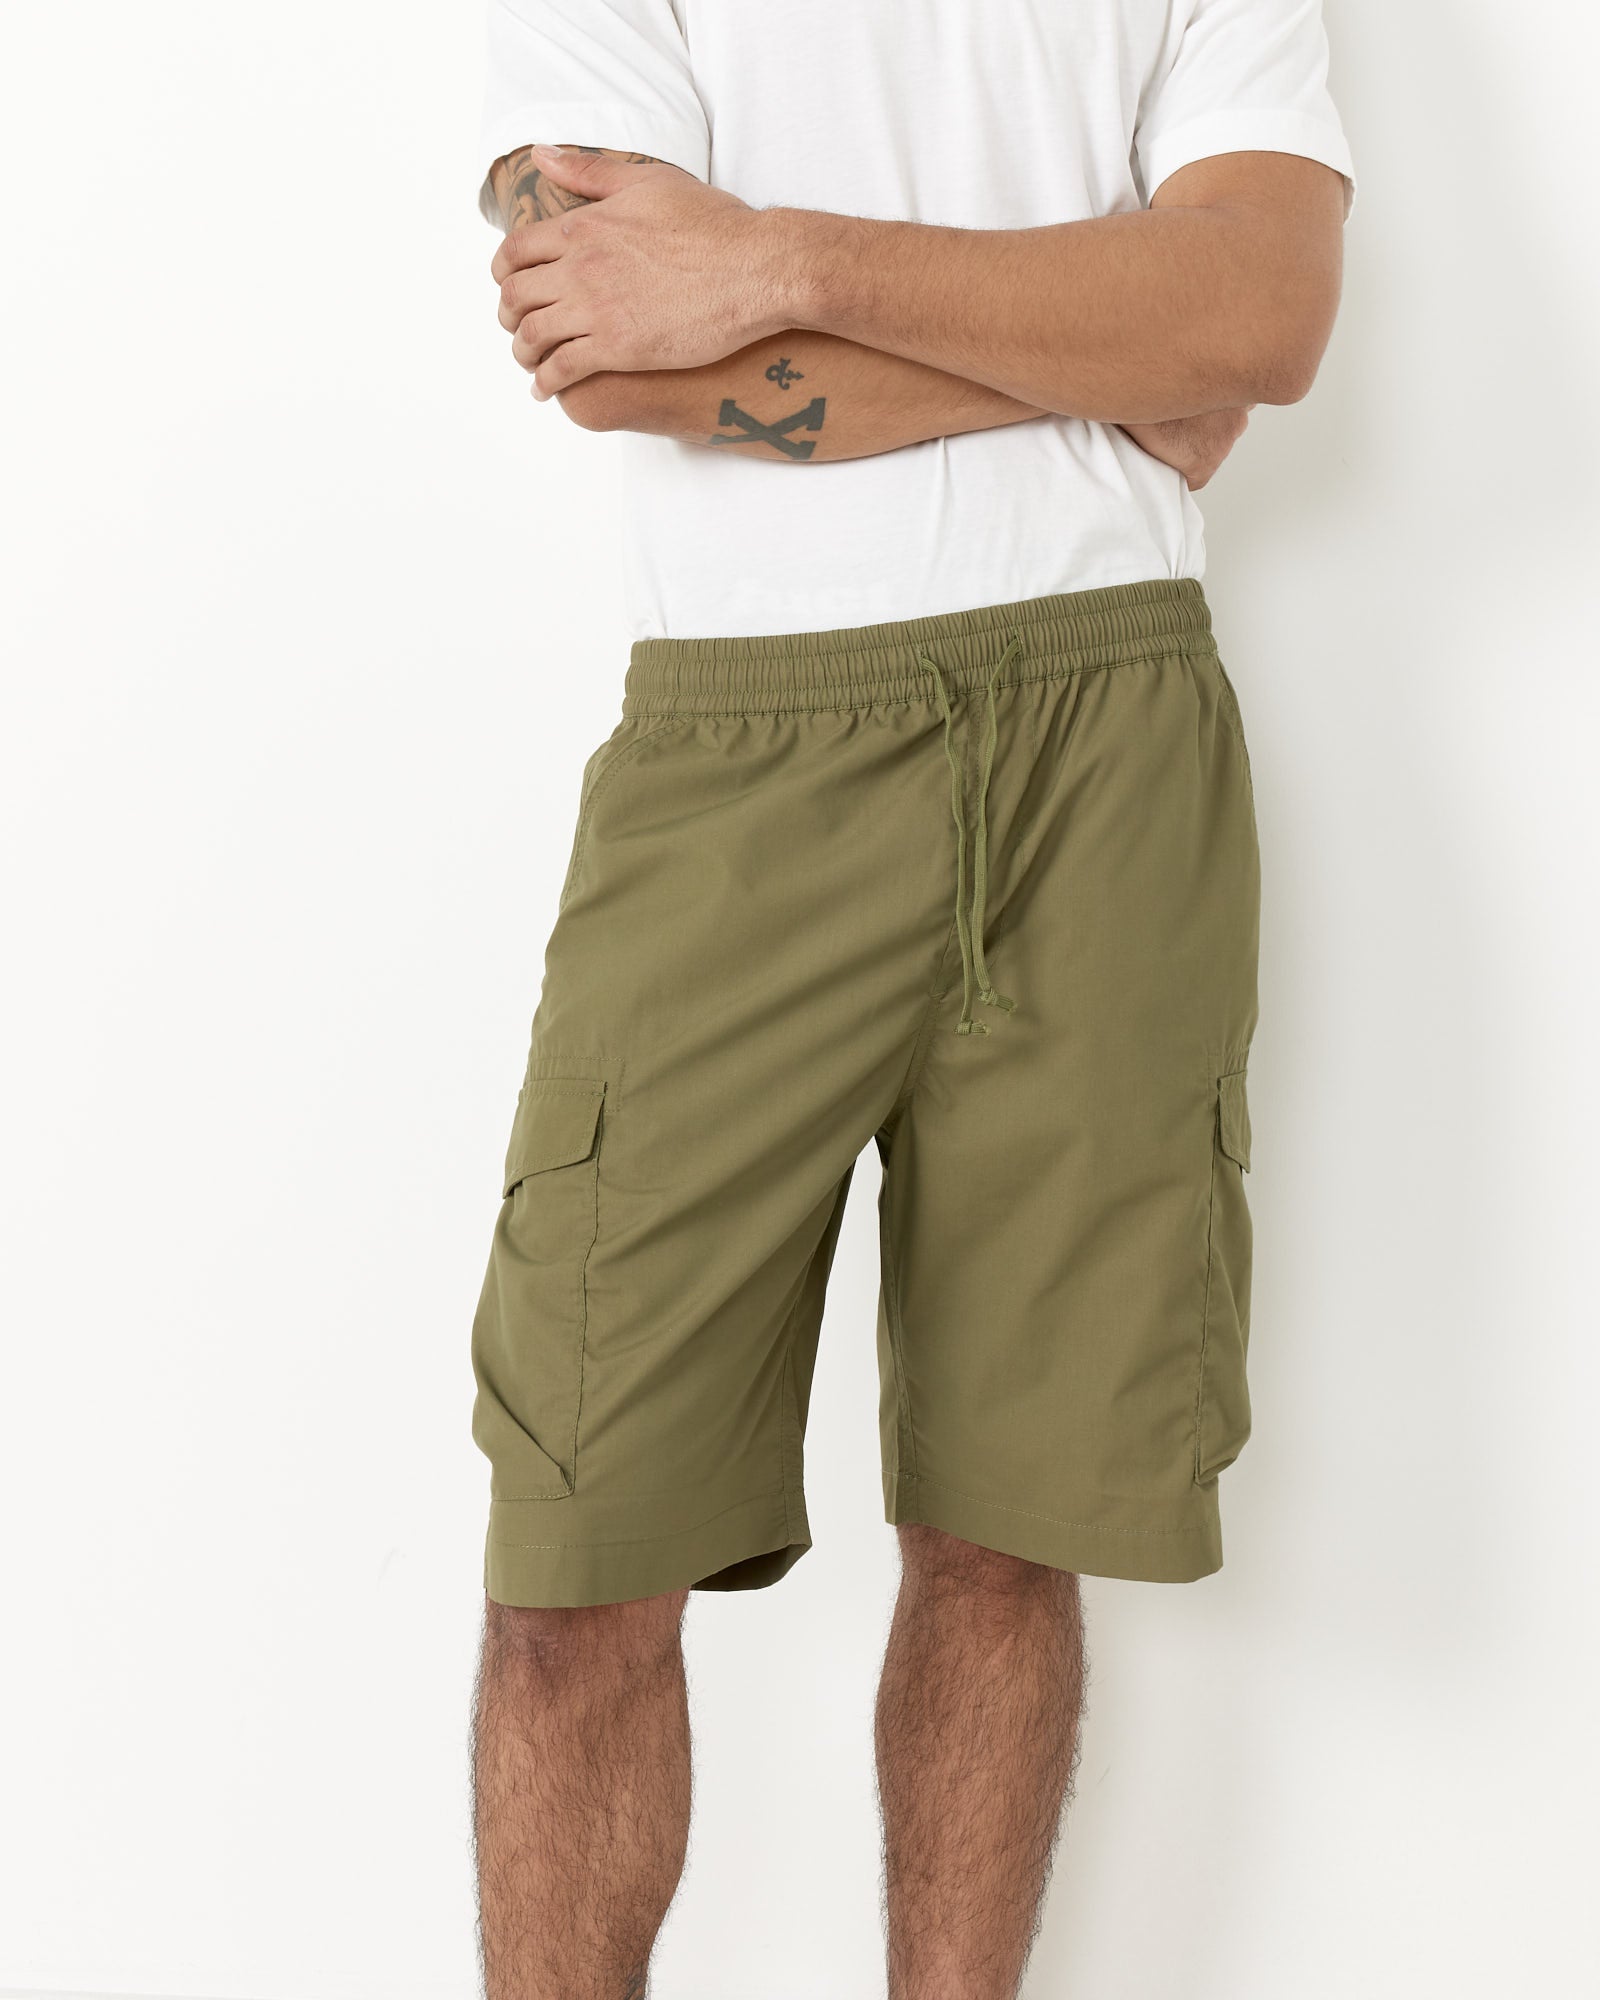 Parachute Short in Olive